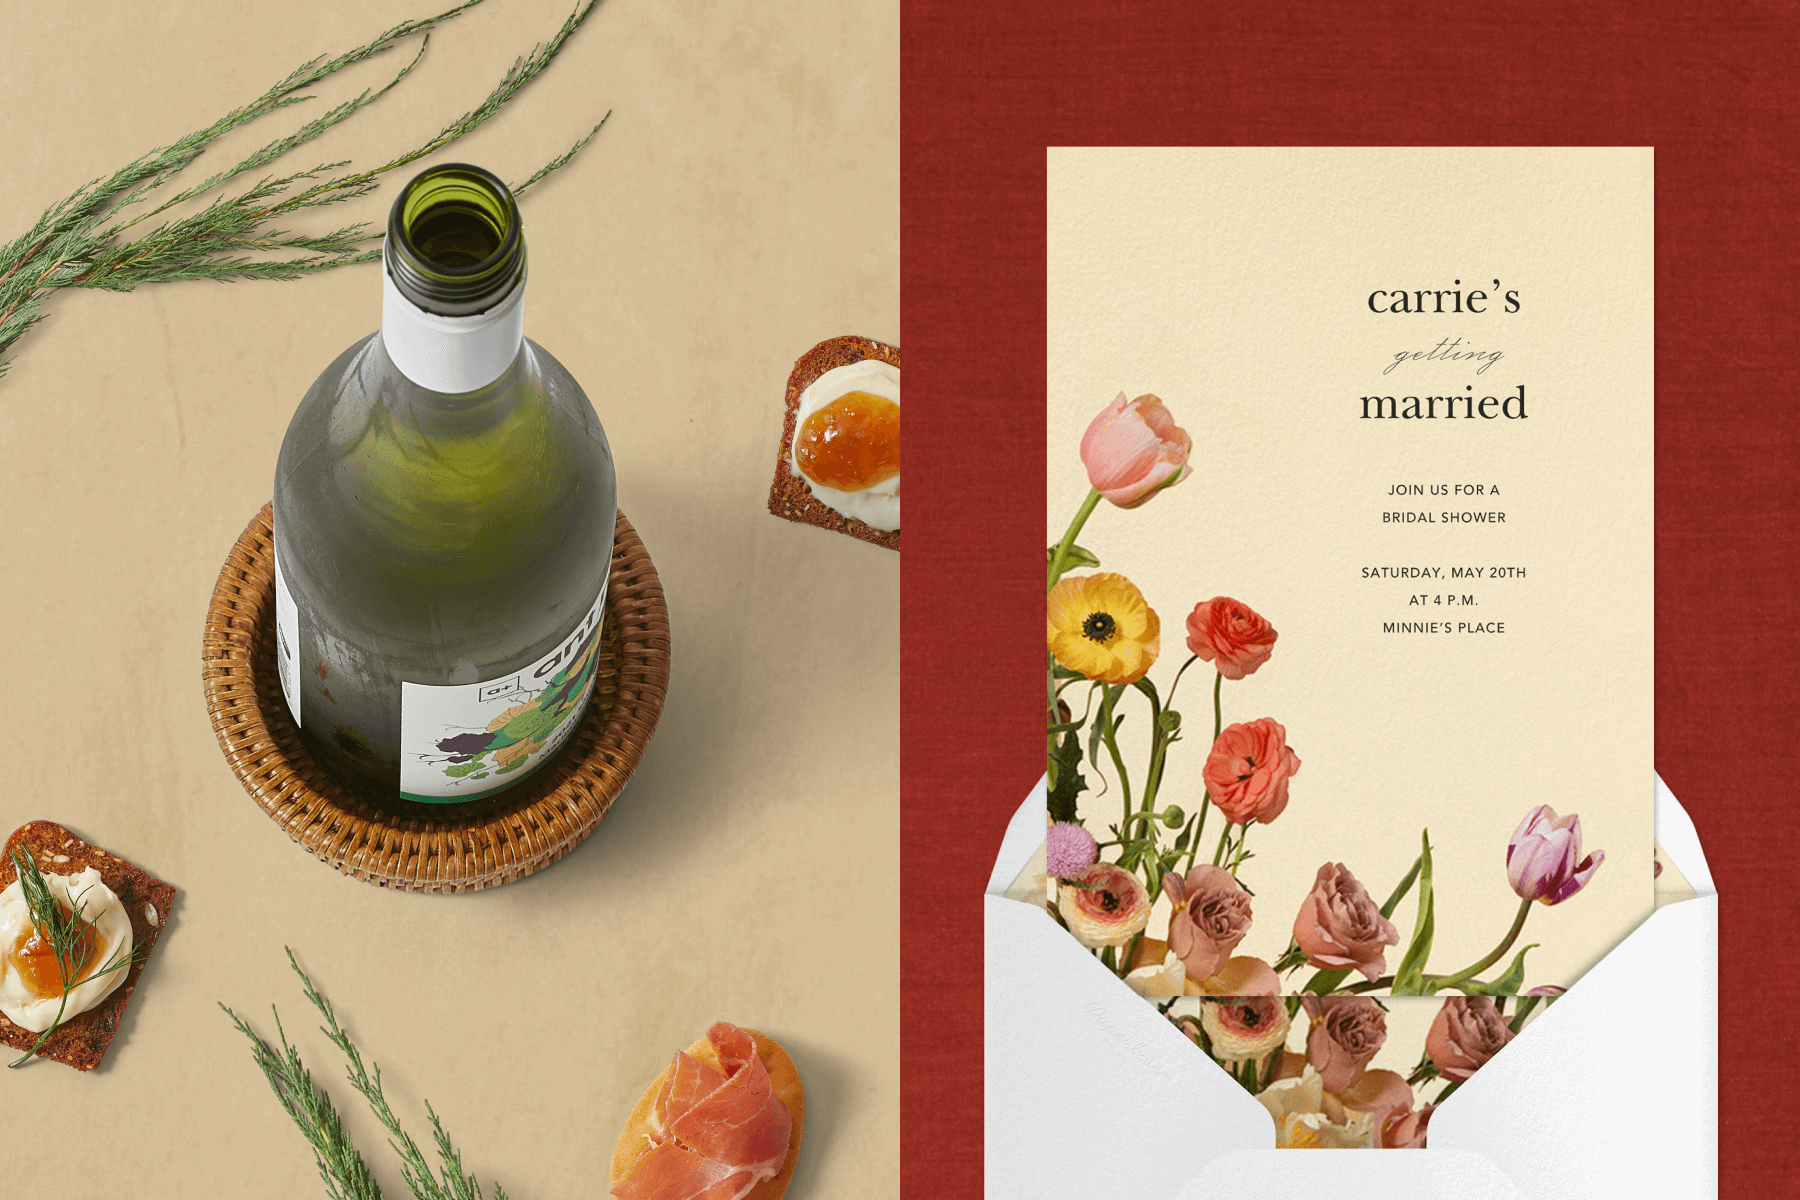 A wine bottle on a woven rattan coaster with small hors d'oeuvres. Right: A bridal shower invitation with photos of tulips, roses, and other flowers growing from the lower left corner.